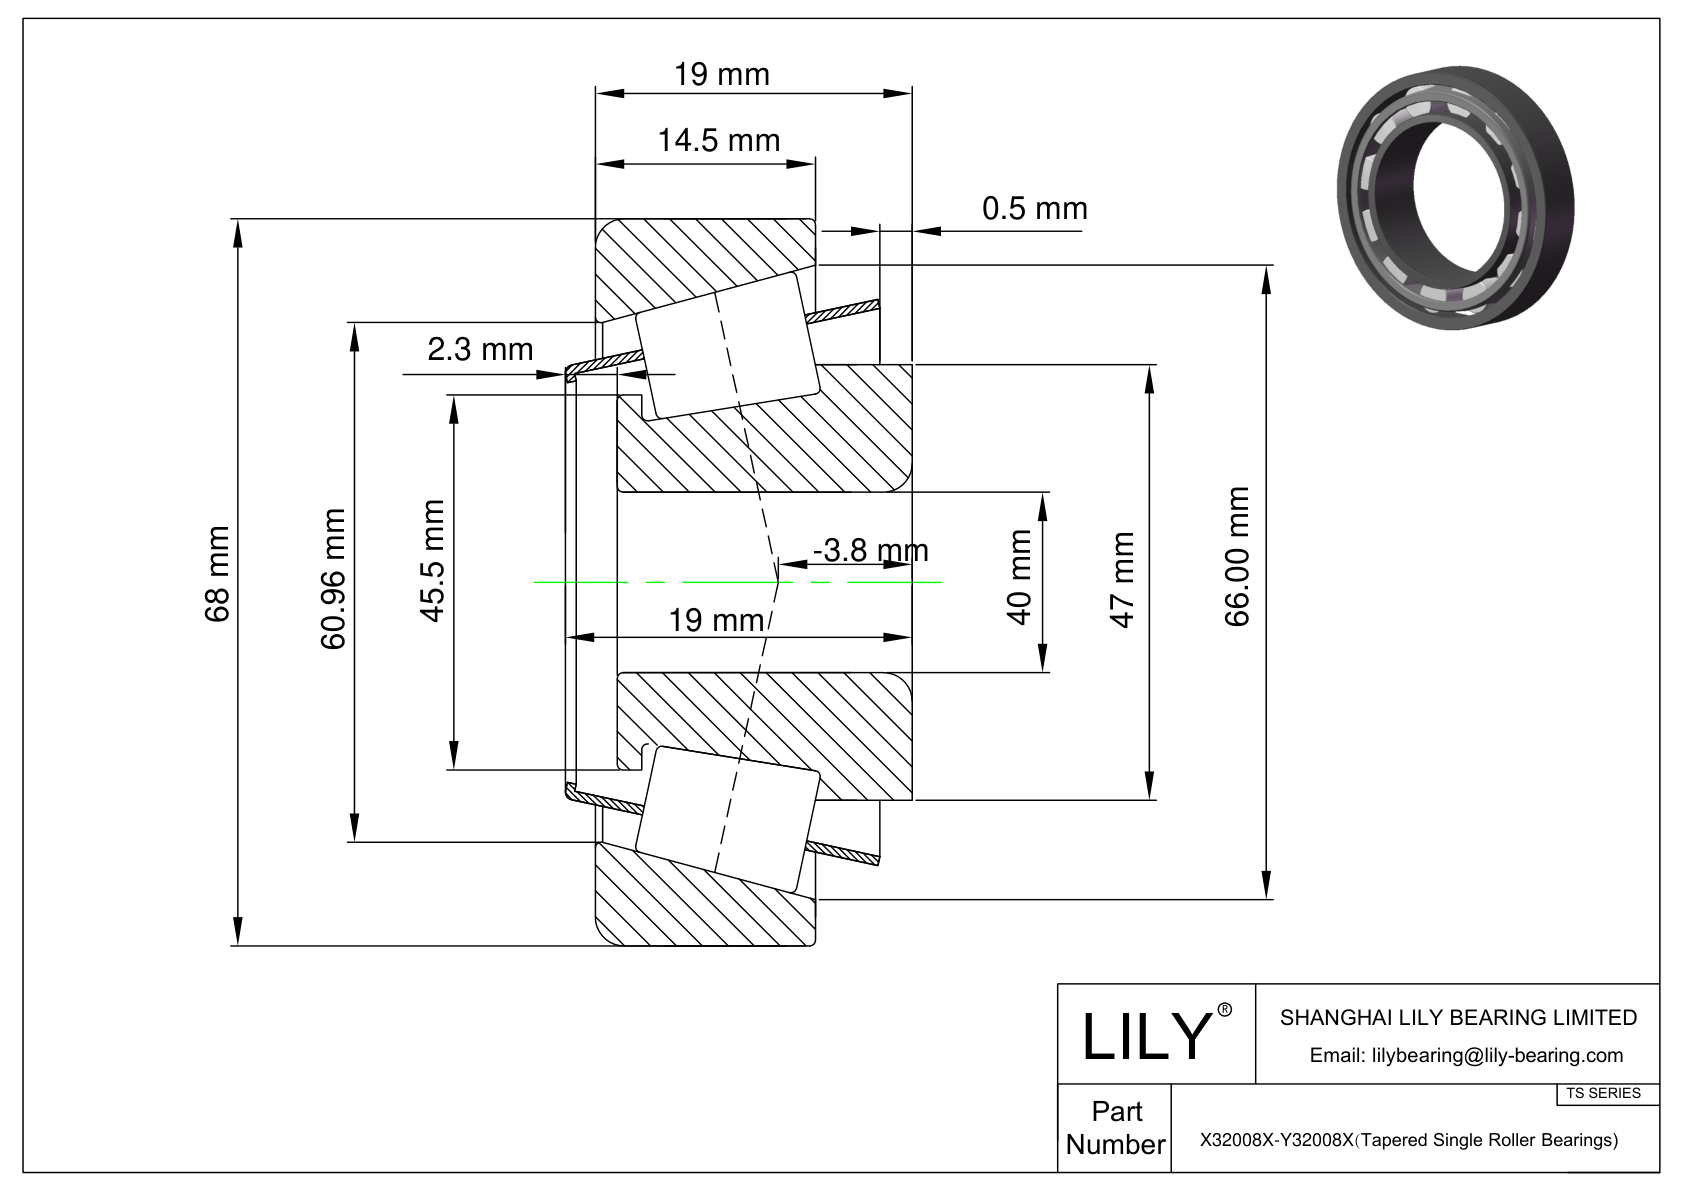 X32008X-Y32008X TS (Tapered Single Roller Bearings) (Metric) cad drawing